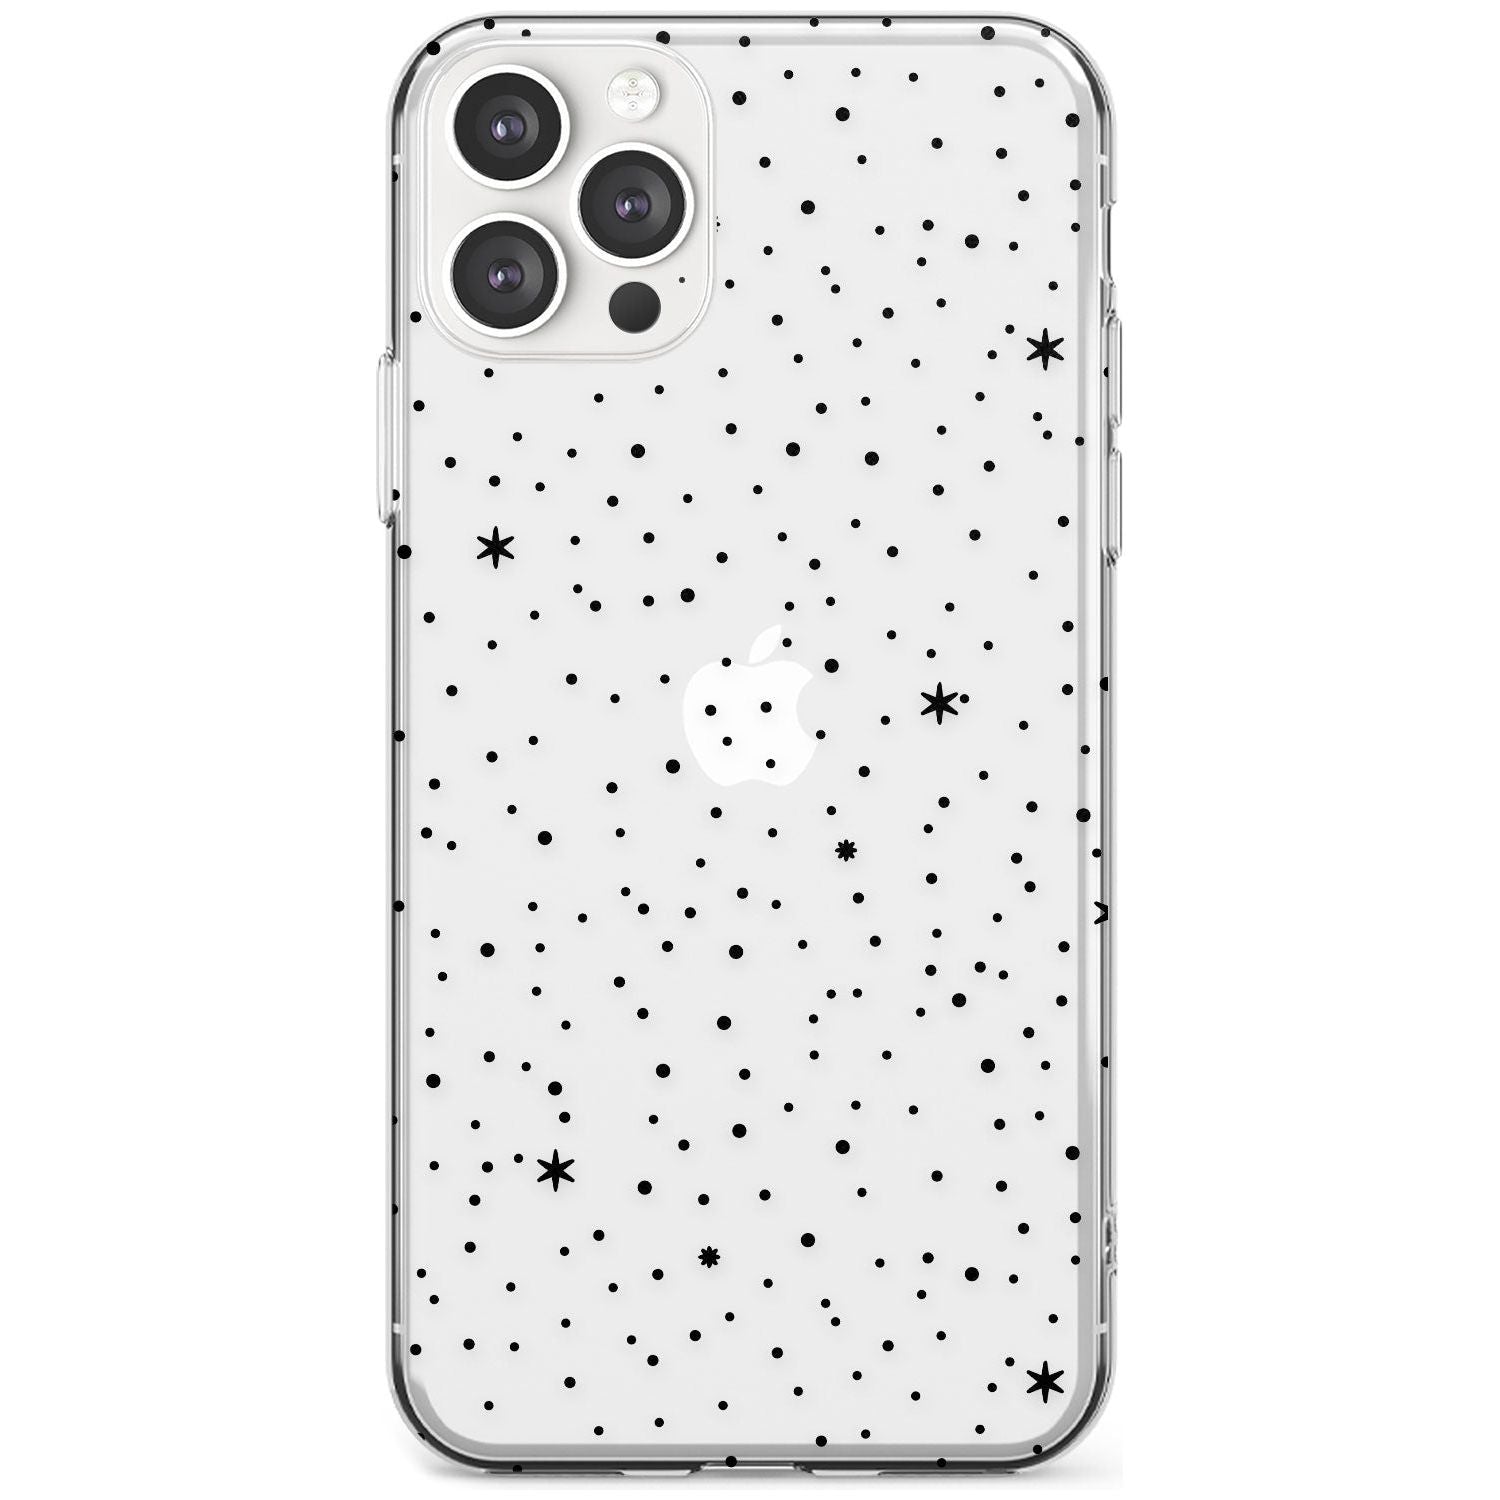 Celestial Starry Sky Black Impact Phone Case for iPhone 11 Pro Max